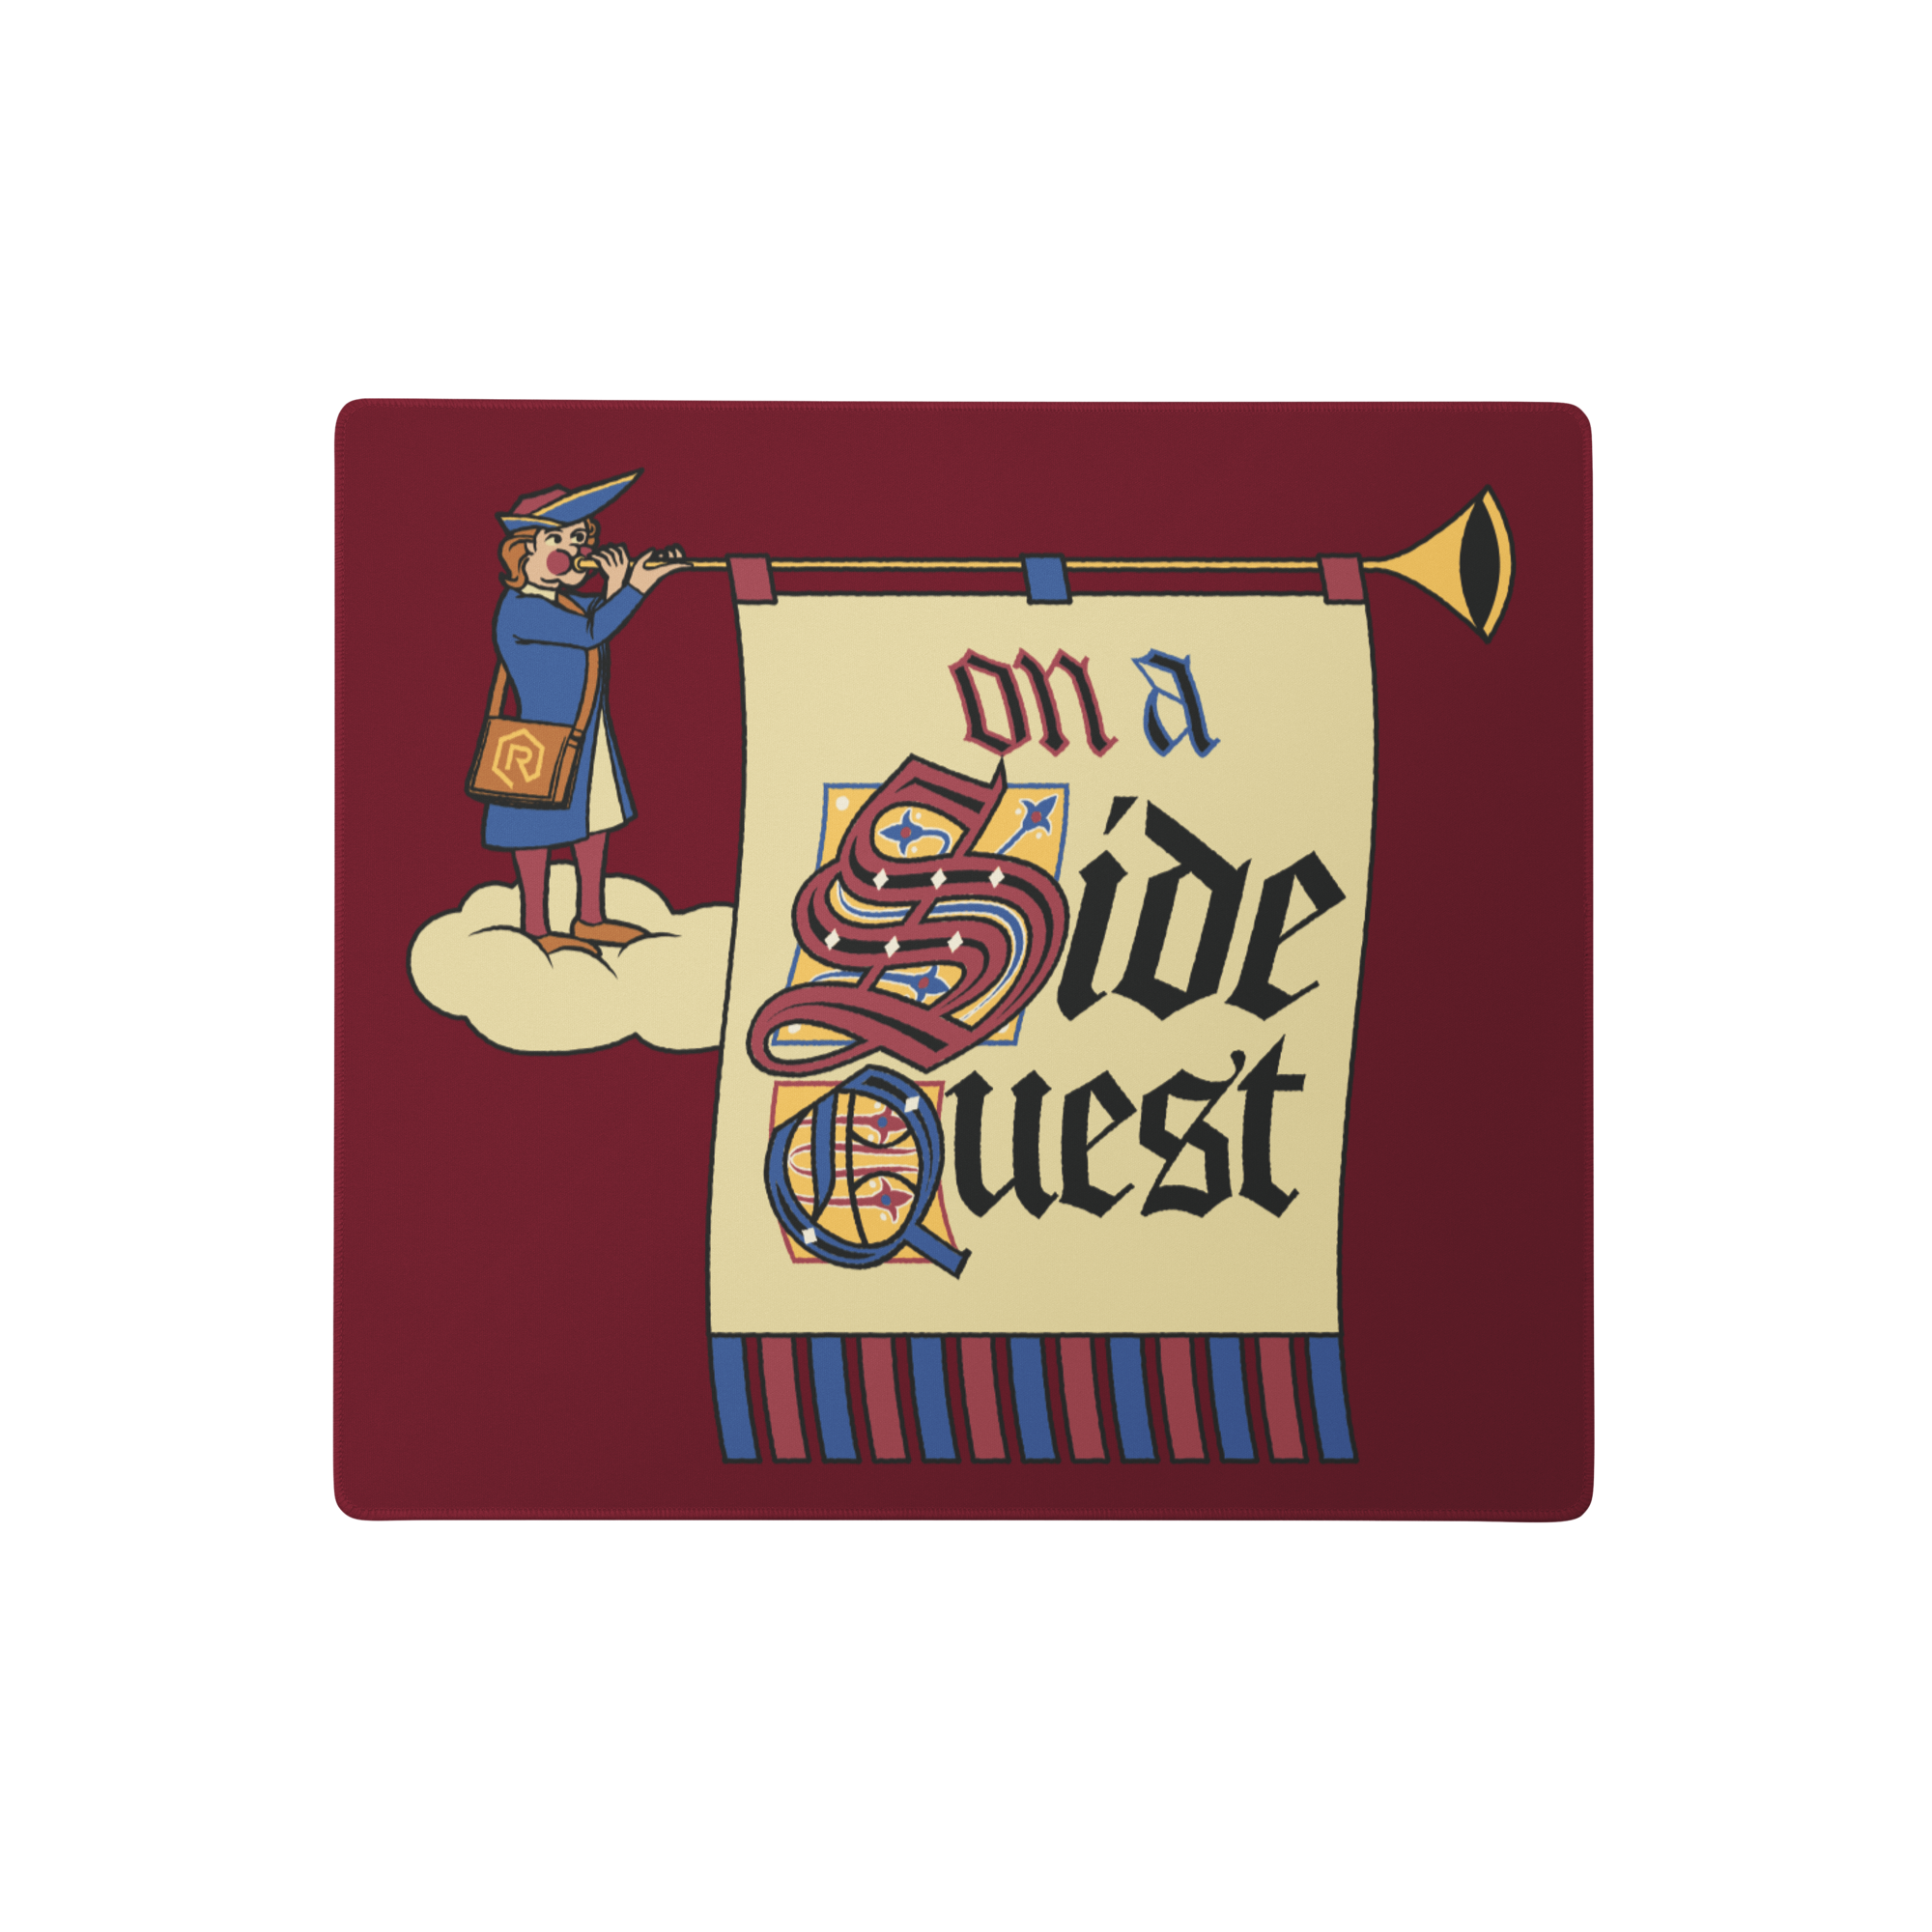 On a Side Quest Mouse Pad | Rollacrit